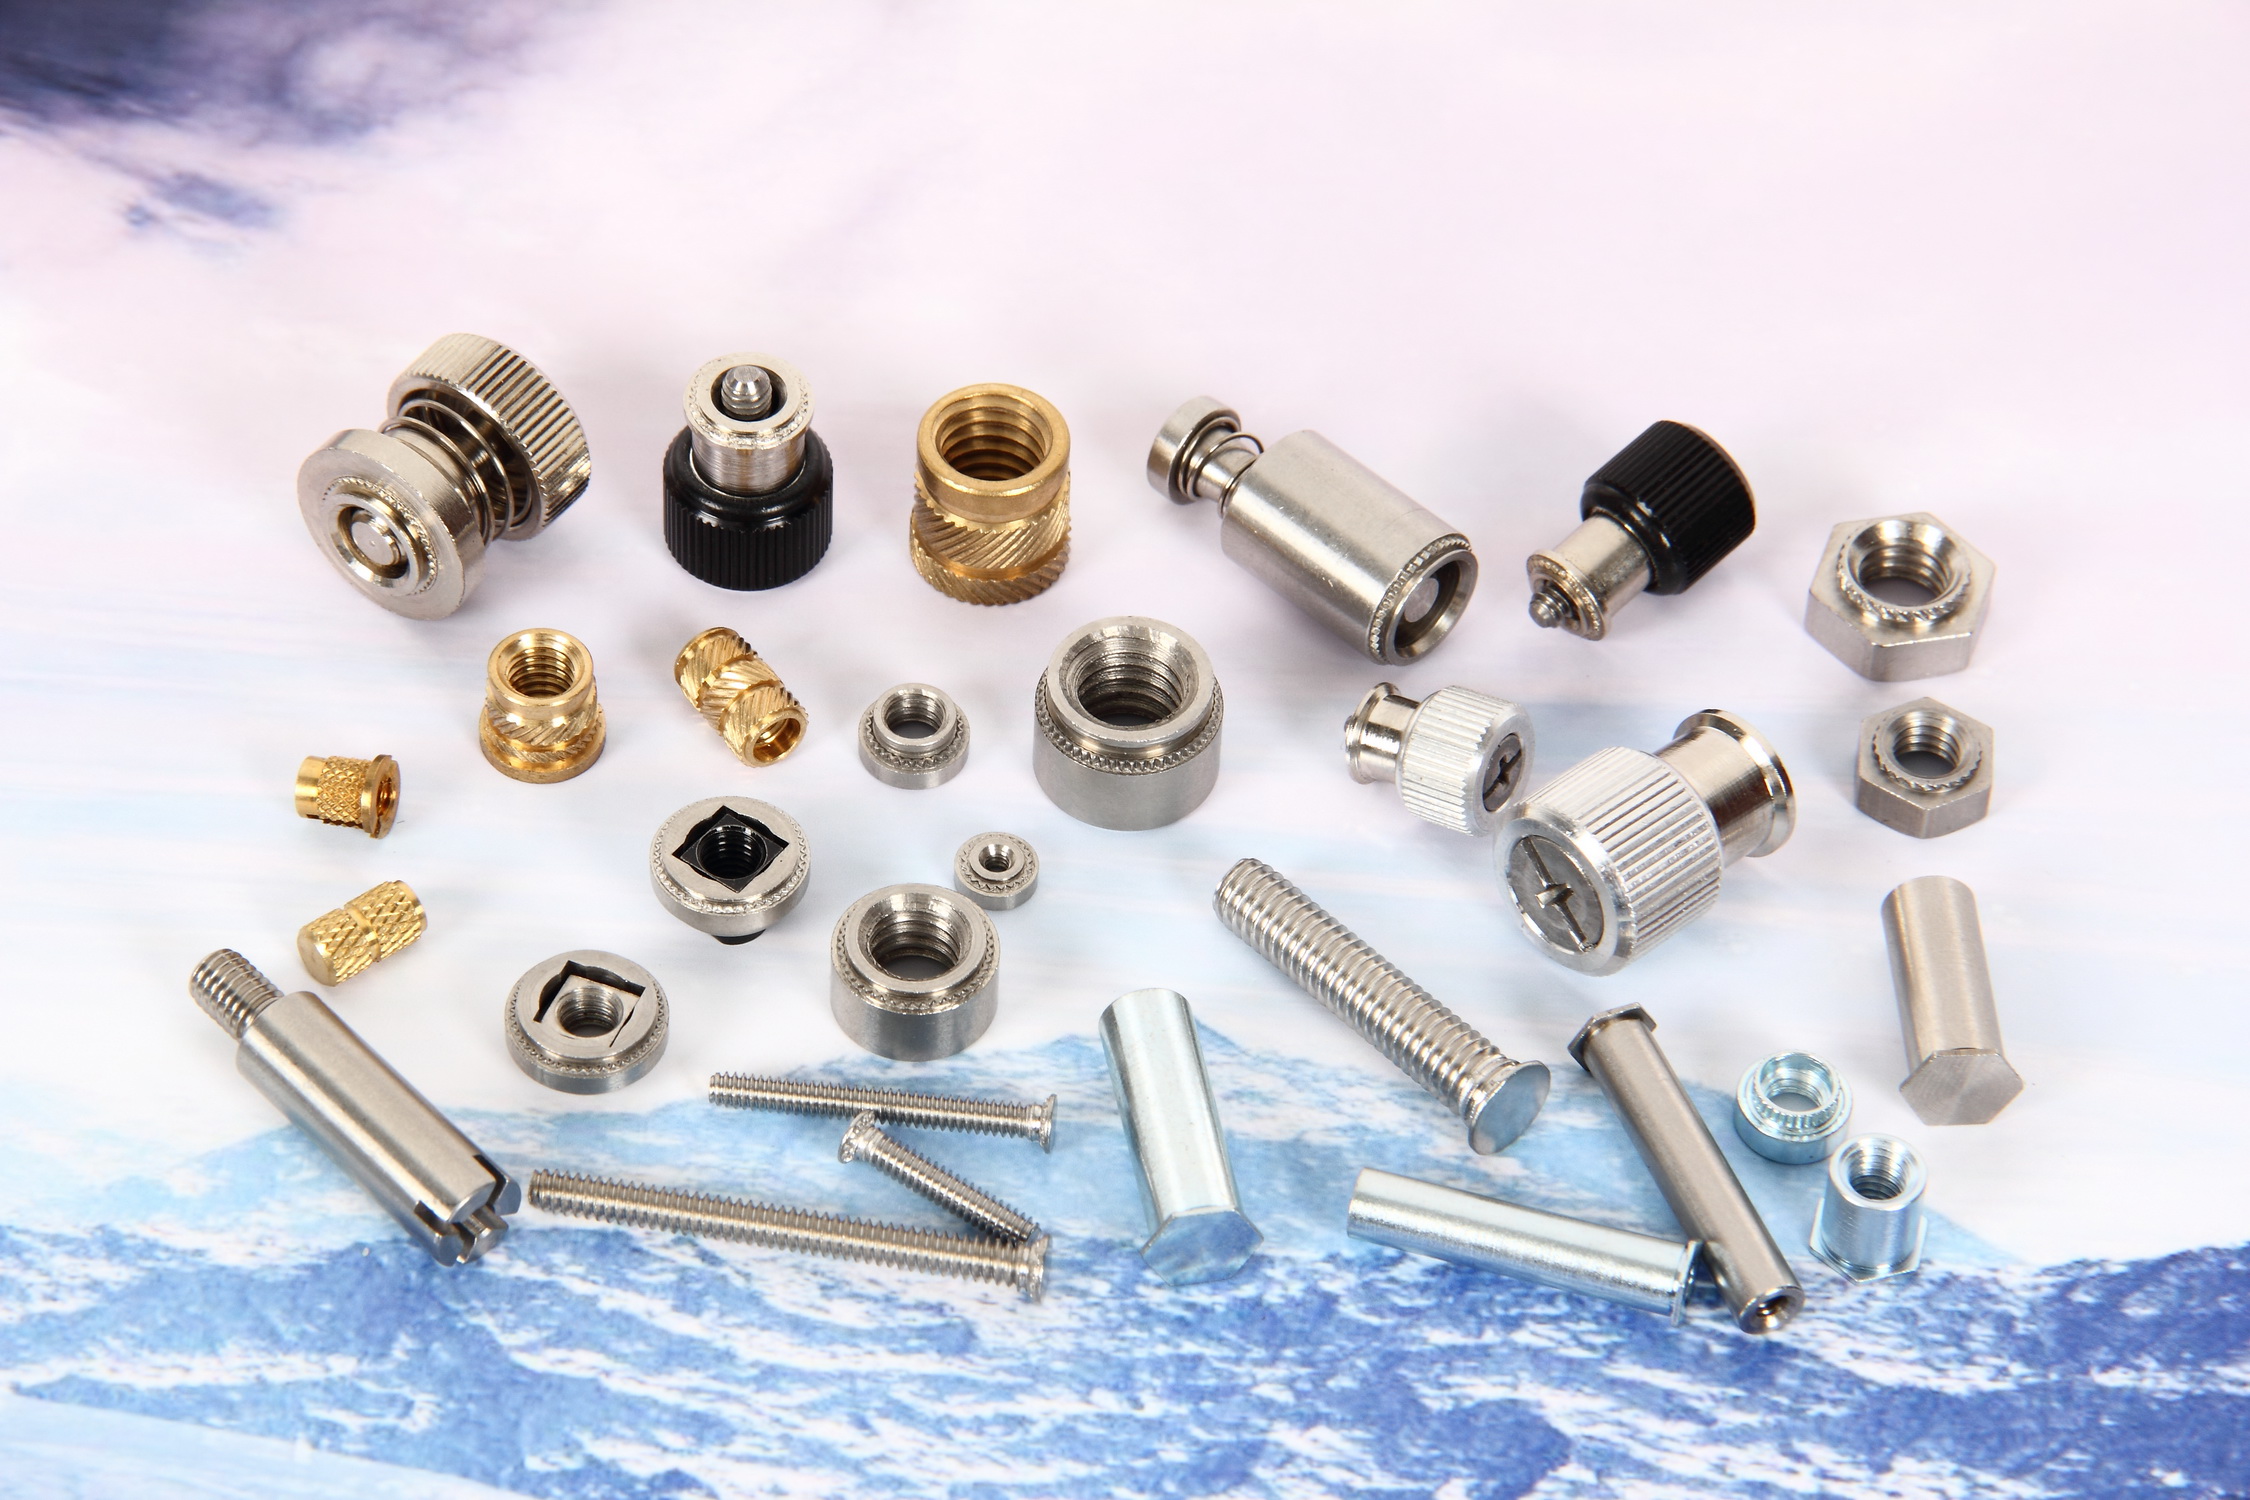 Common mistakes in fasteners choosing,how many items do point you？